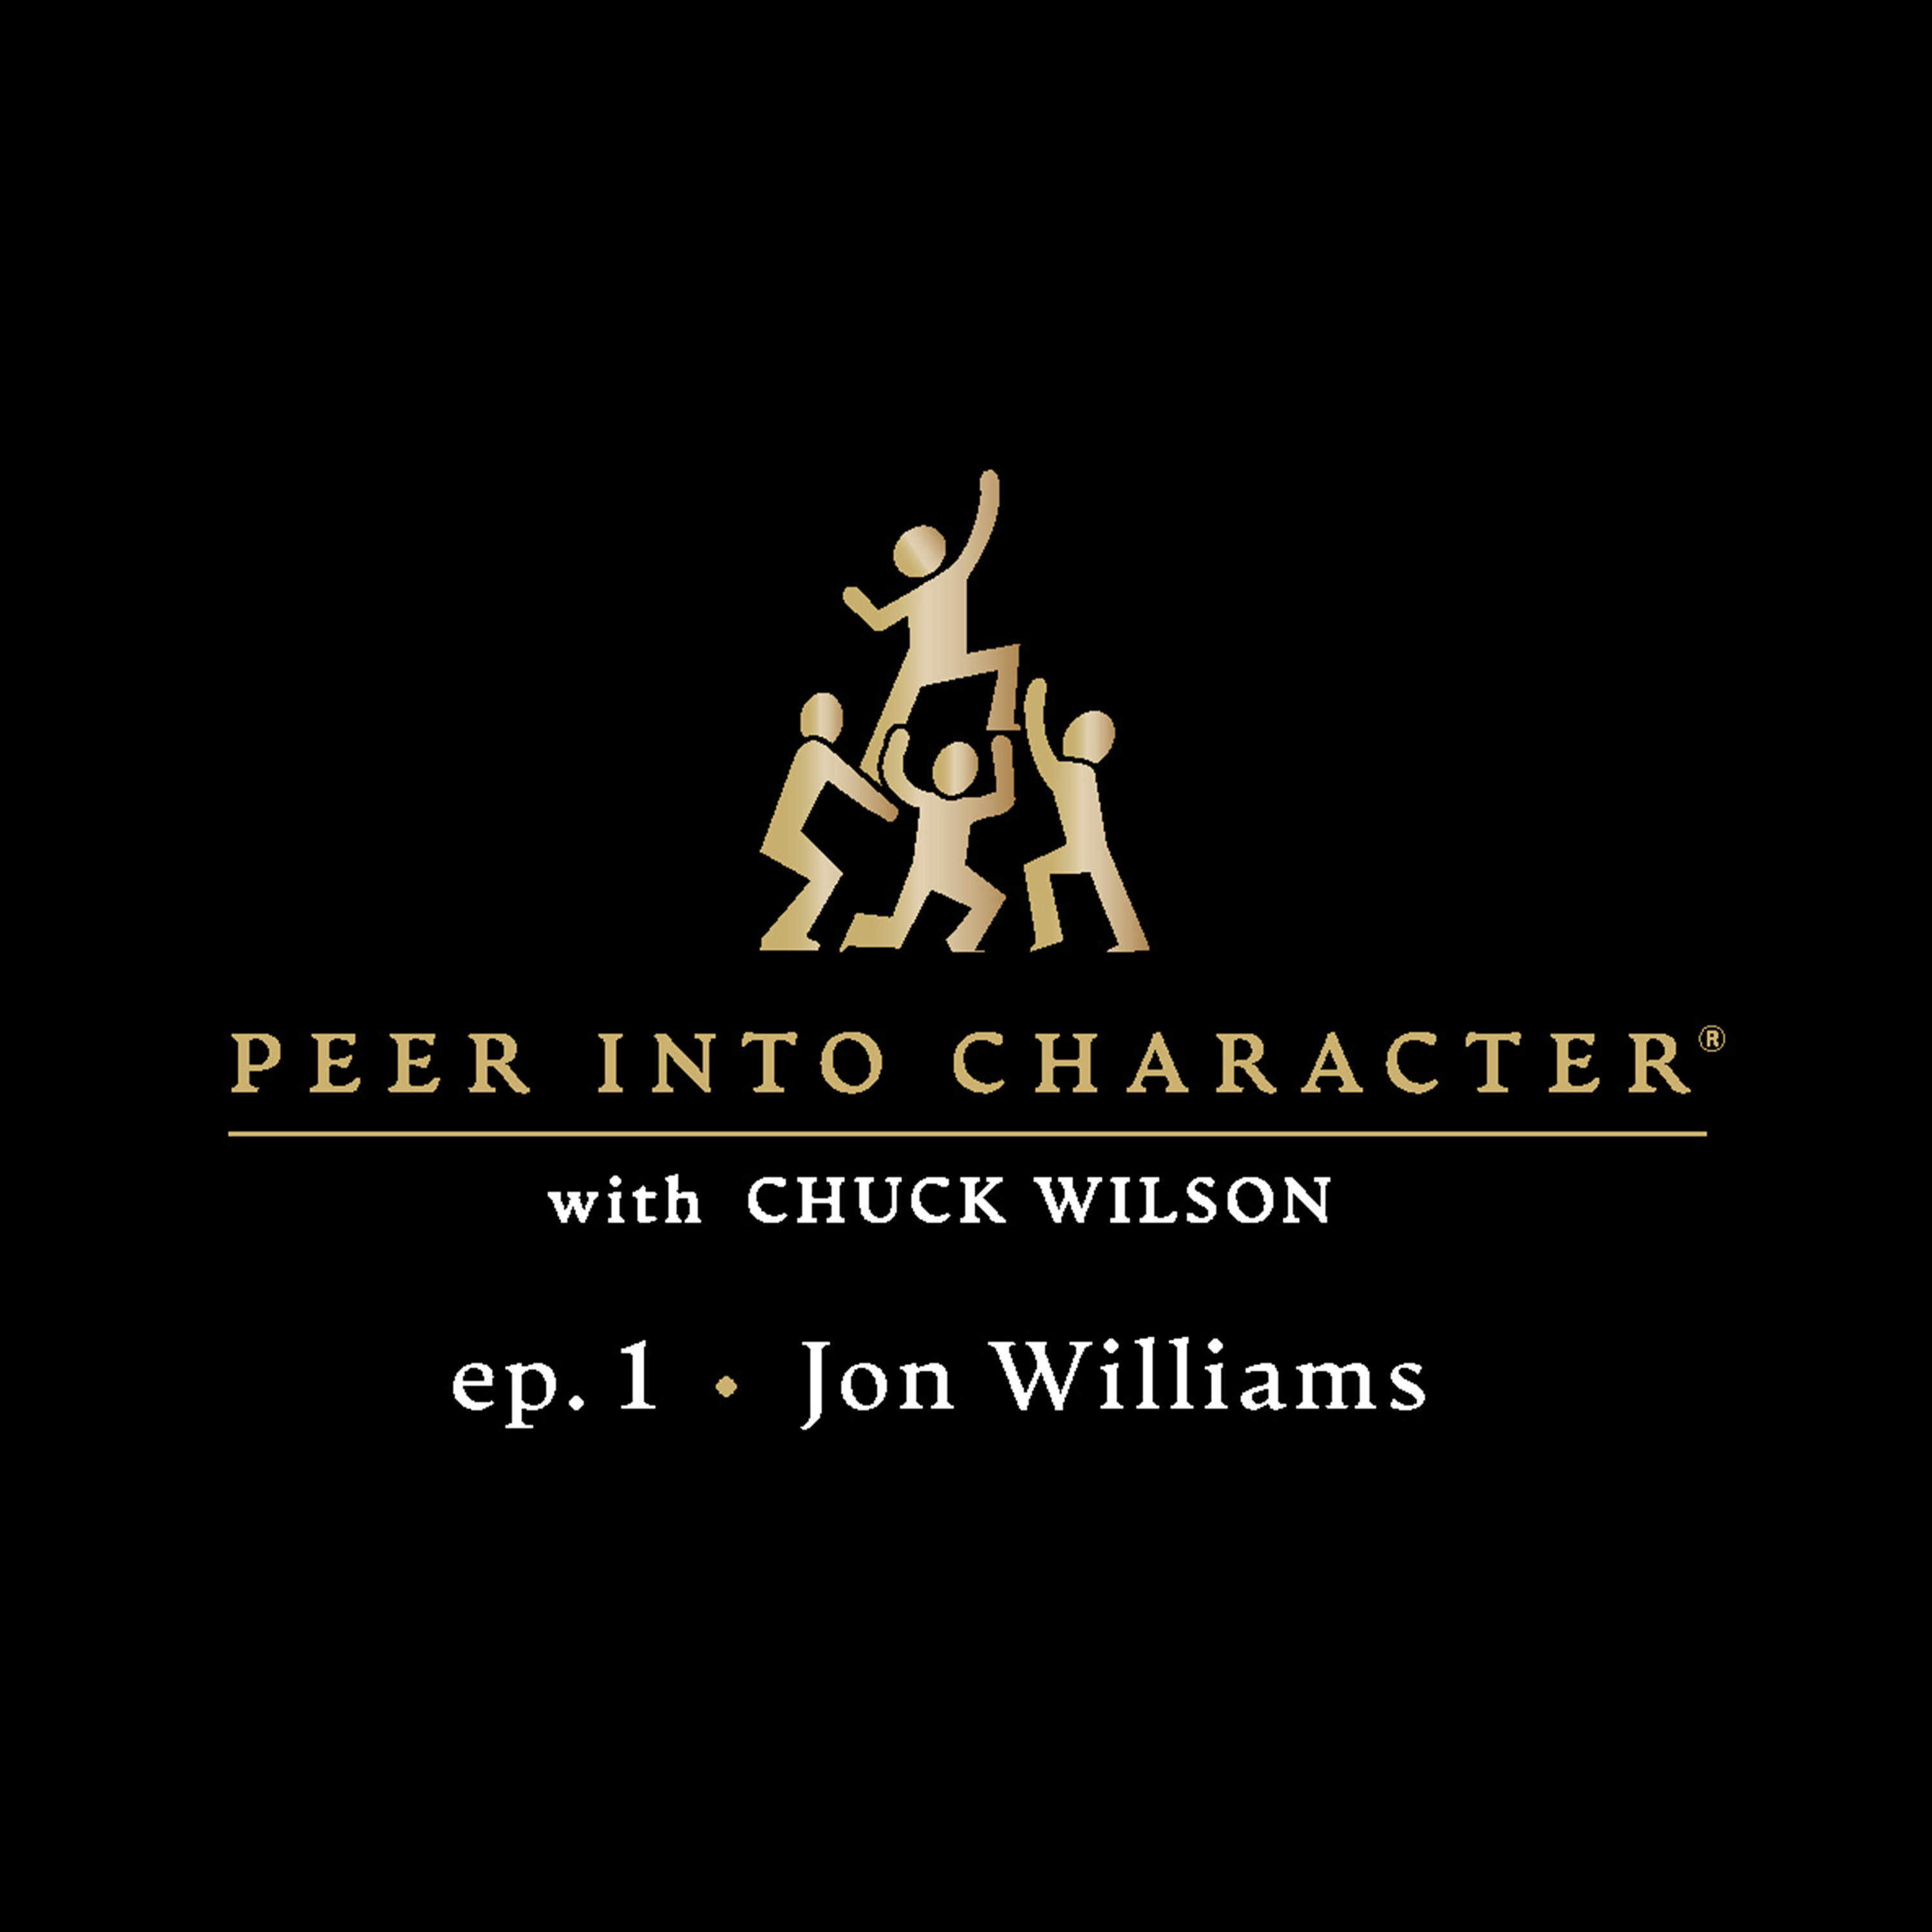 ep. 1: Jon Williams: Patriots Player Overcomes Adversity, Inspires Young Athletes